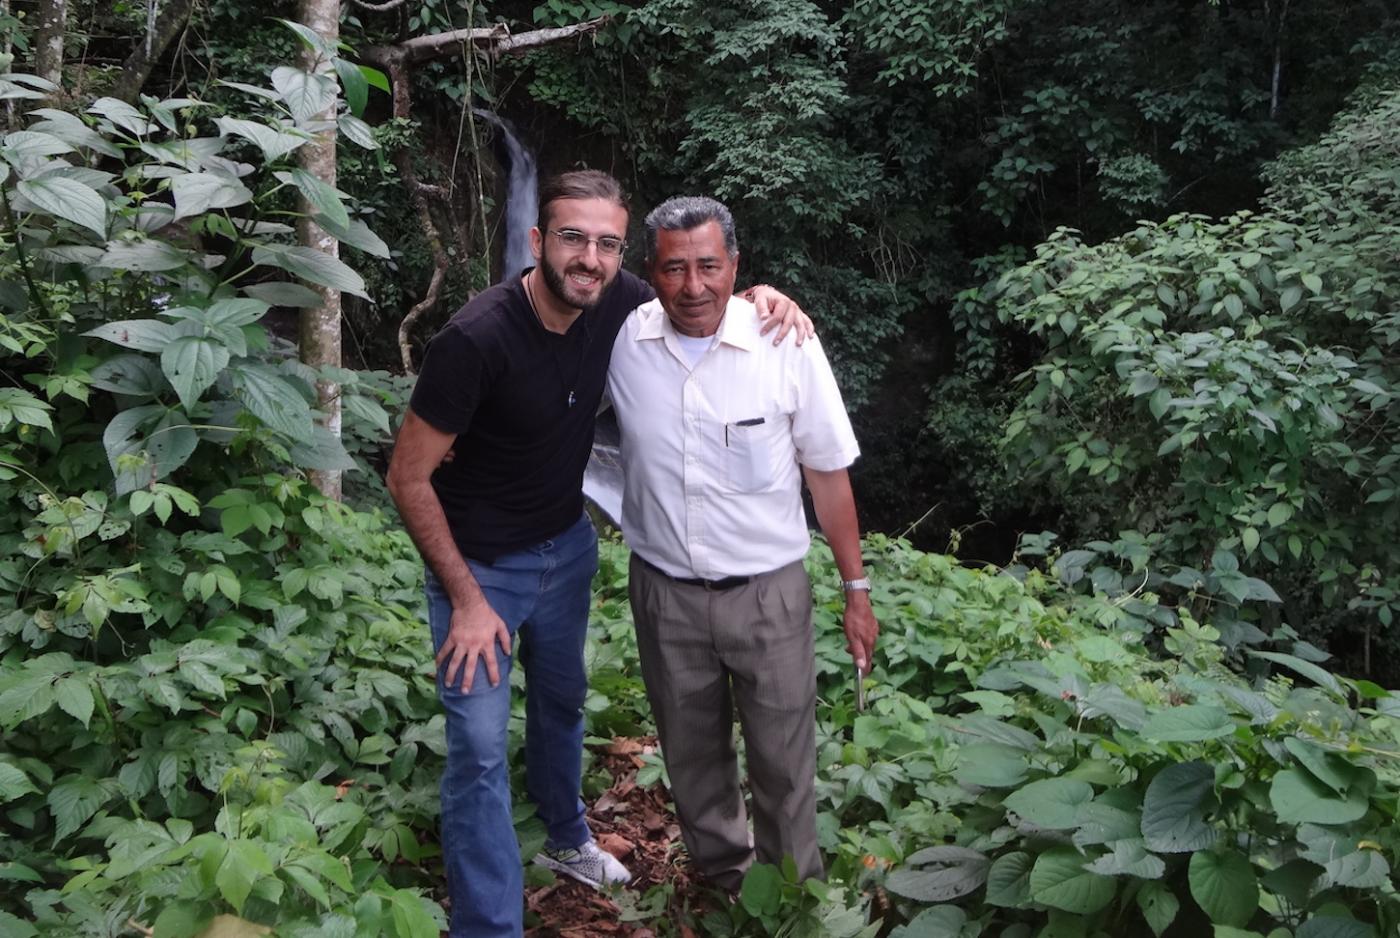 Daniel poses with a local farmer in the mountains of Copan, Honduras, where he works as a human rights advocate. 